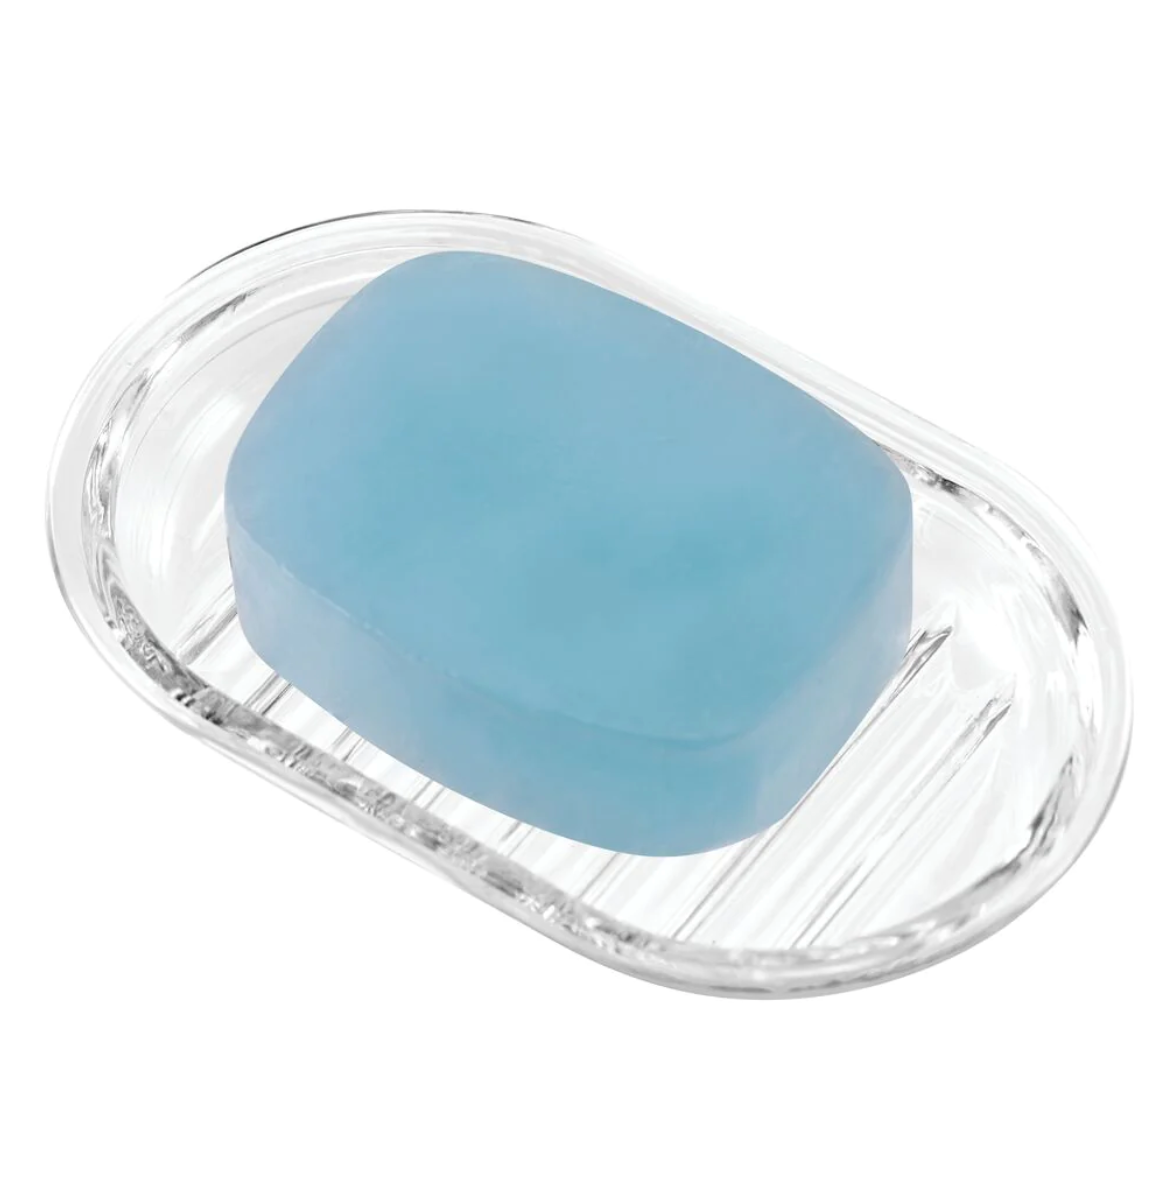 Royal Round Plastic Soap Saver – Clear